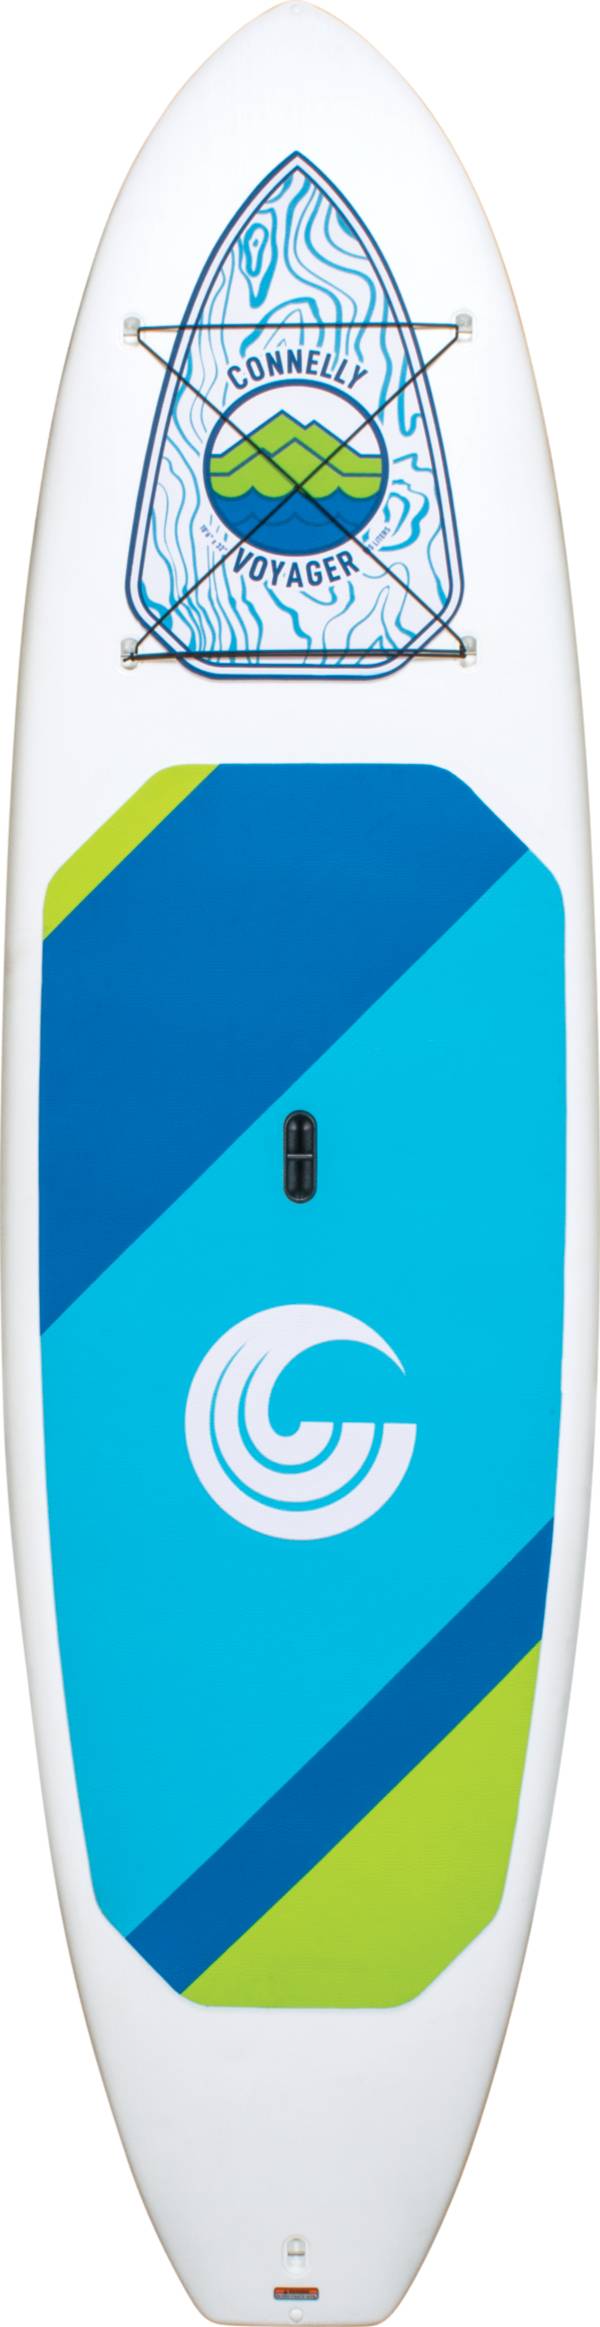 Connelly Voyager 2.0 Stand-Up Paddle Board product image